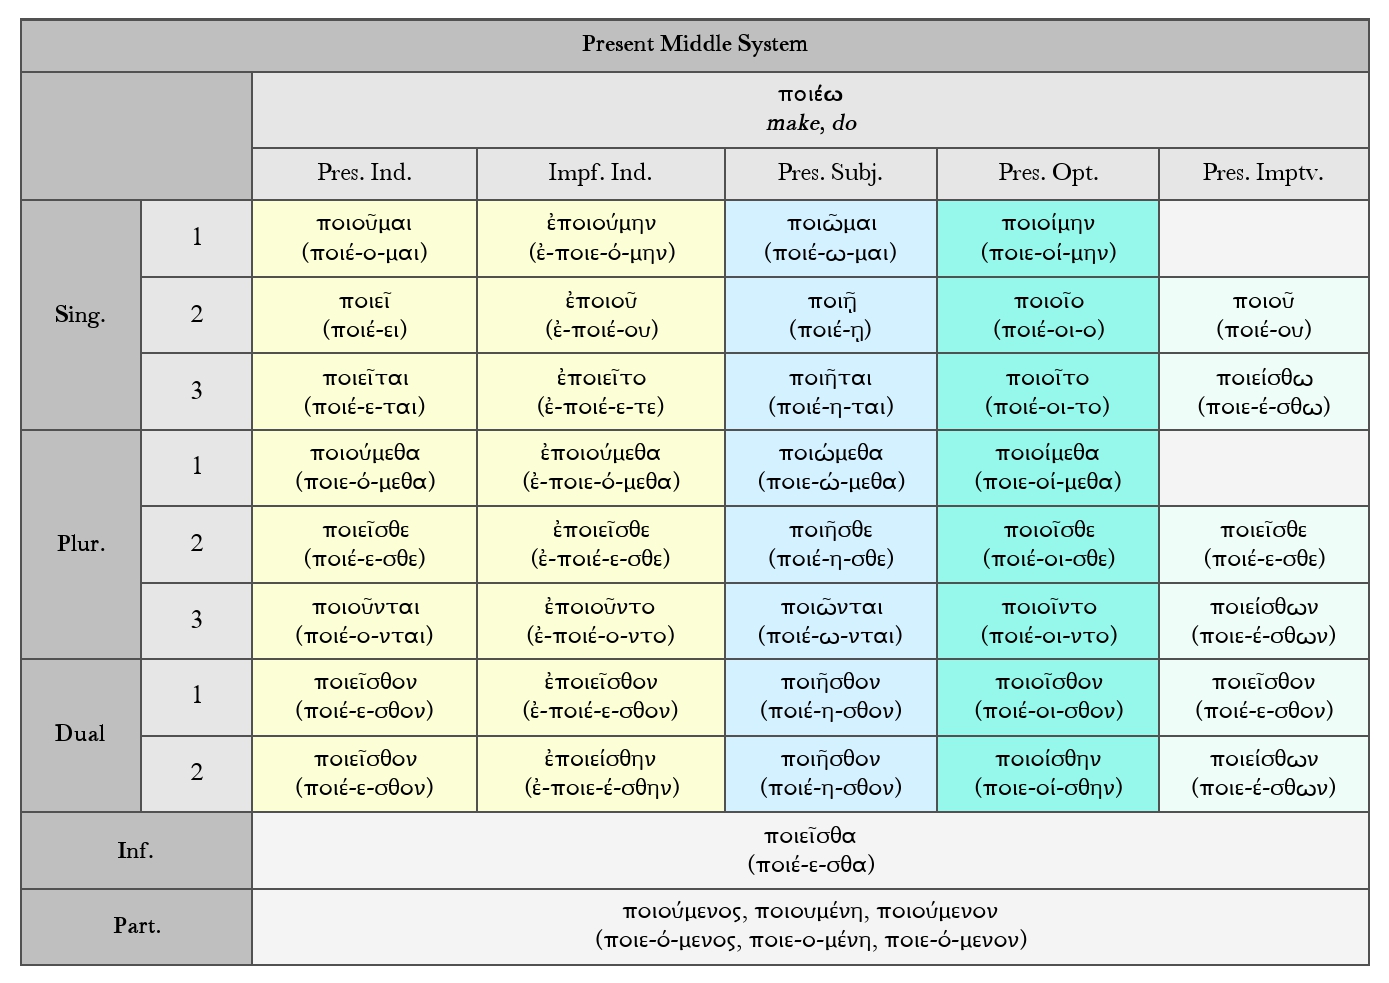 Goodell: Present Middle System Paradigm Chart for ποιέω